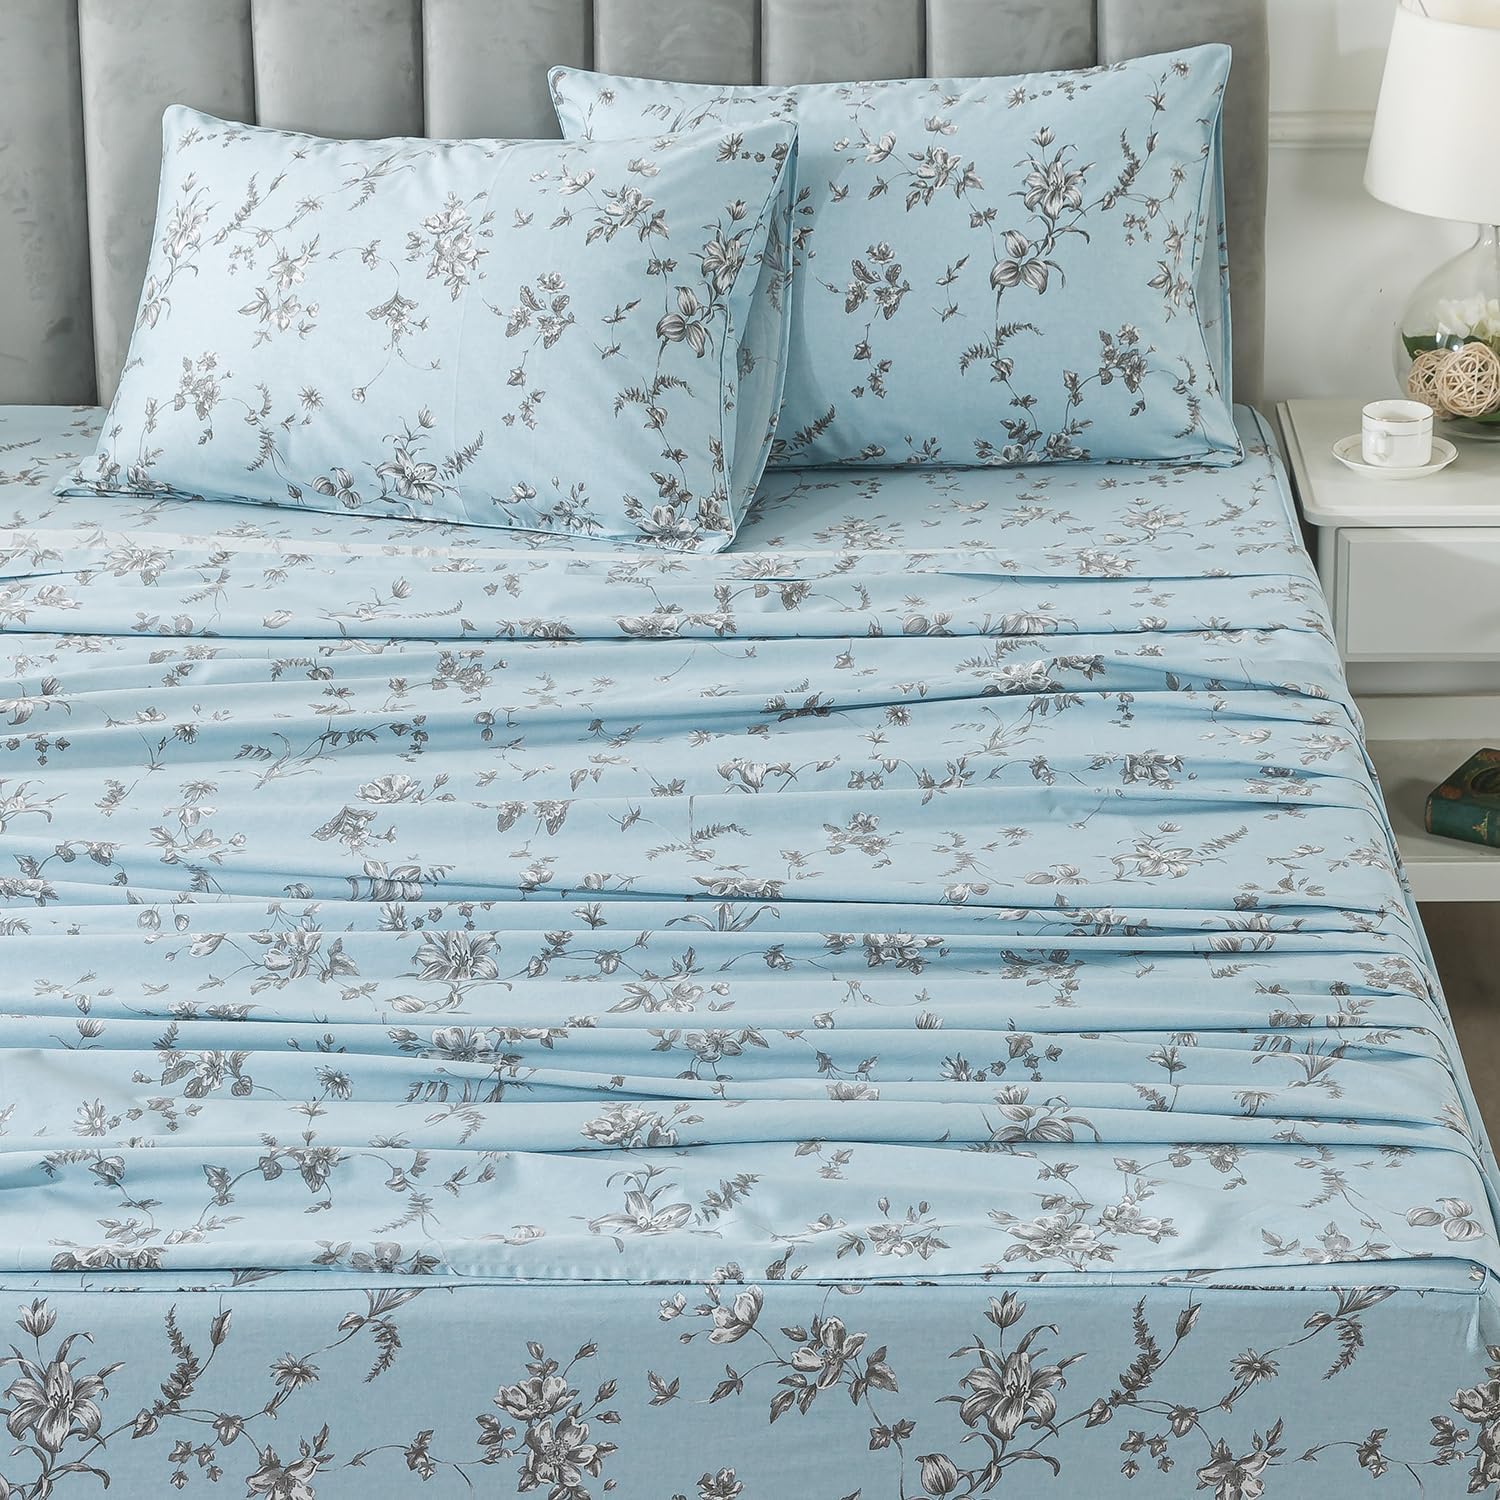 FADFAY Queen Sheet Set Blue Floral Bed Sheets Percale Cotton Shabby Vintage Chic Bedding Grey Flower Printed Sheet All Season Deep Pocket Sheets Luxury Super Soft Breathable Crisp, 4 Pcs